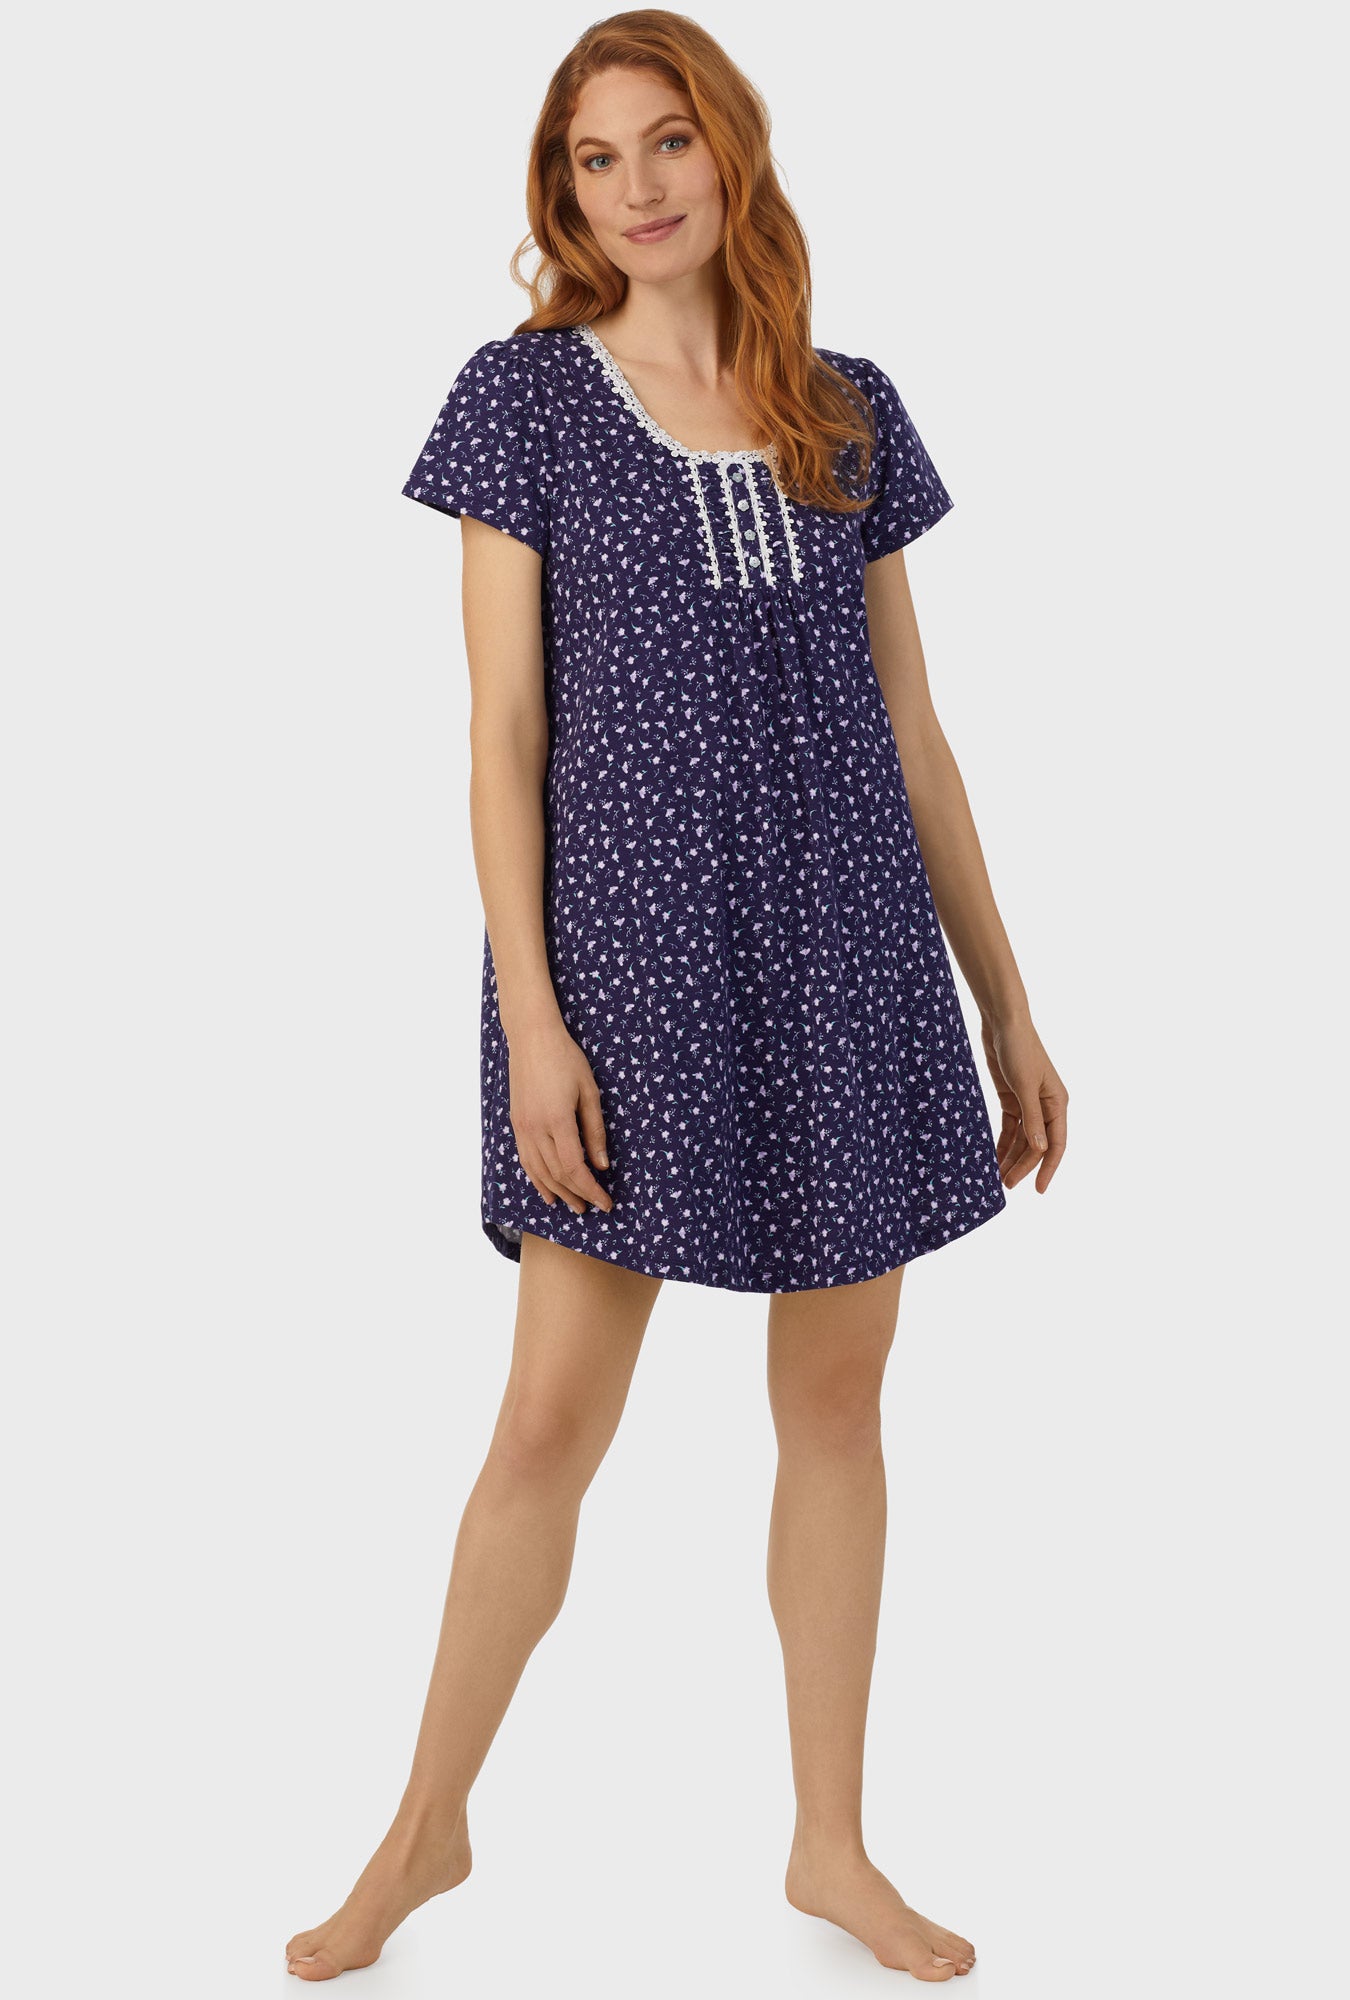 A lady wearing navy cap sleeve nightshirt with midnight blue ditsy floral print.